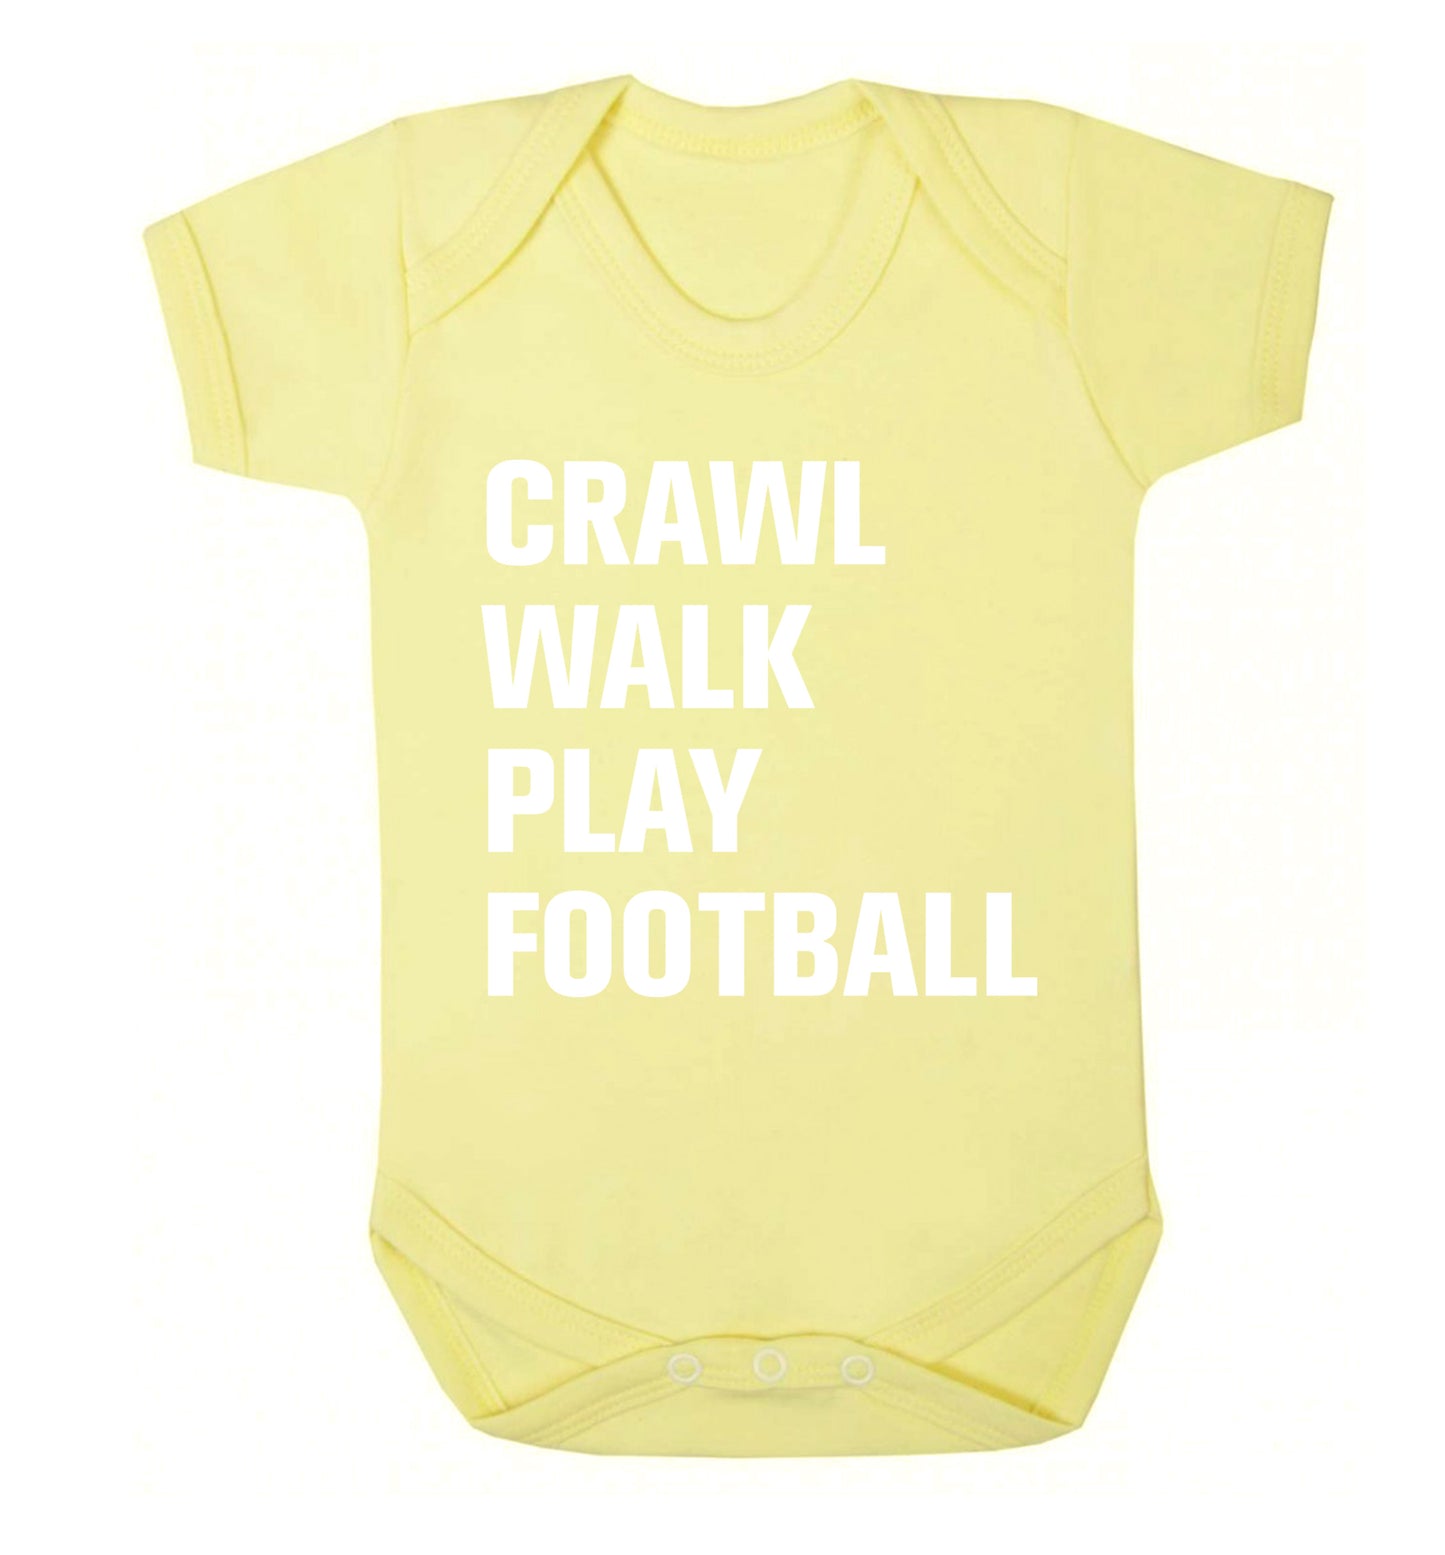 Crawl, walk, play football Baby Vest pale yellow 18-24 months